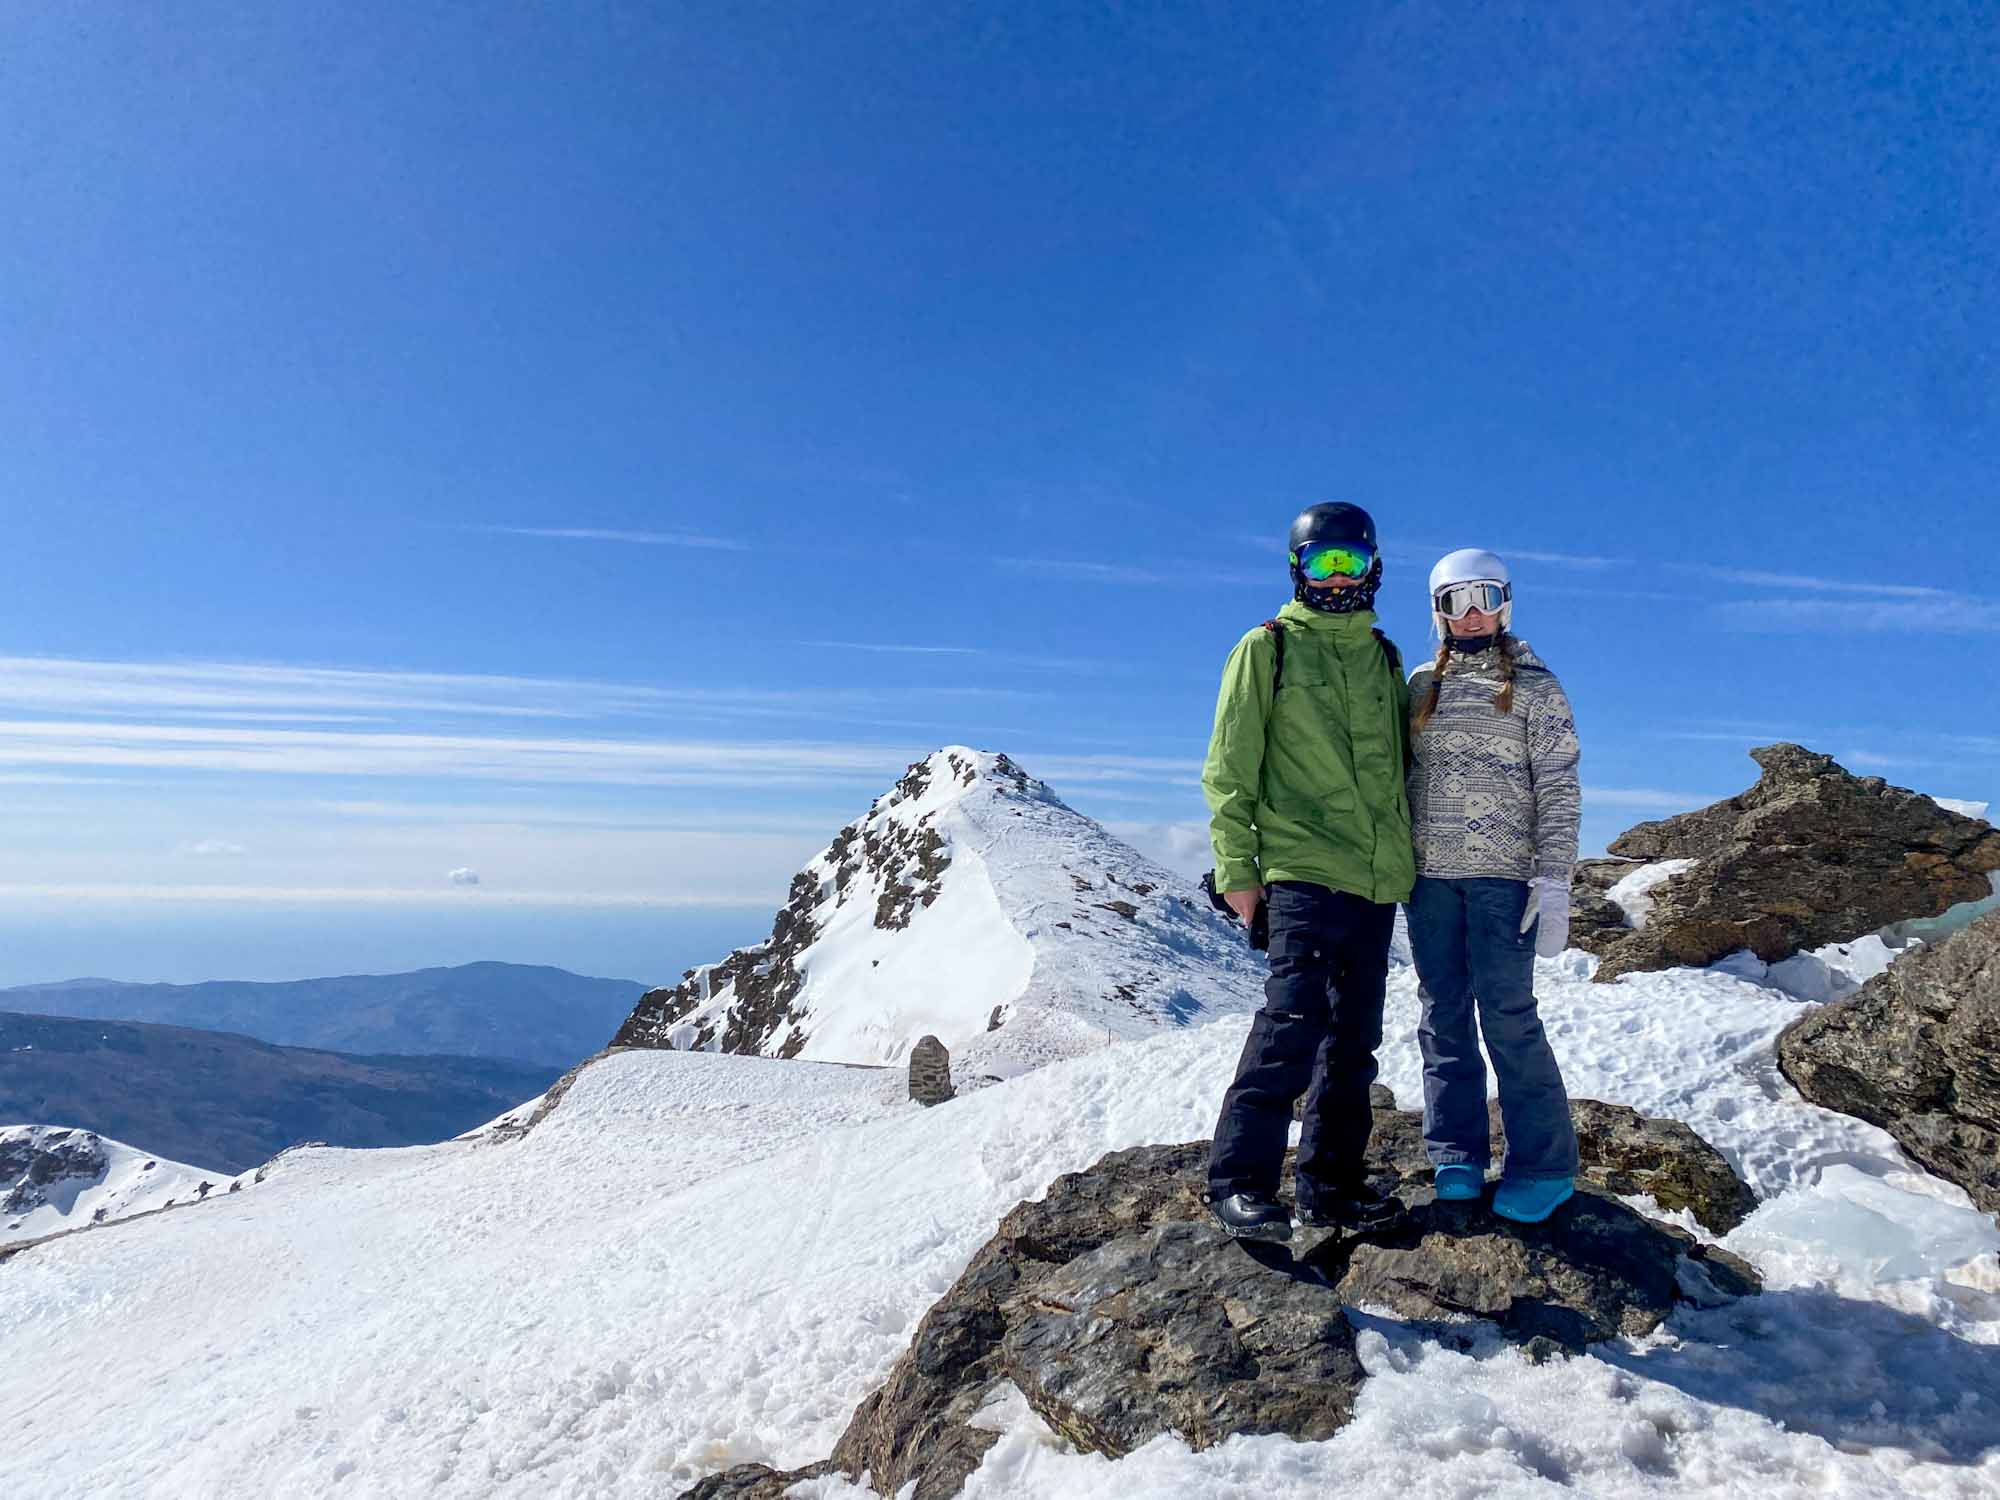 2 people wearing ski clothes stood on the snow on top of a mountain